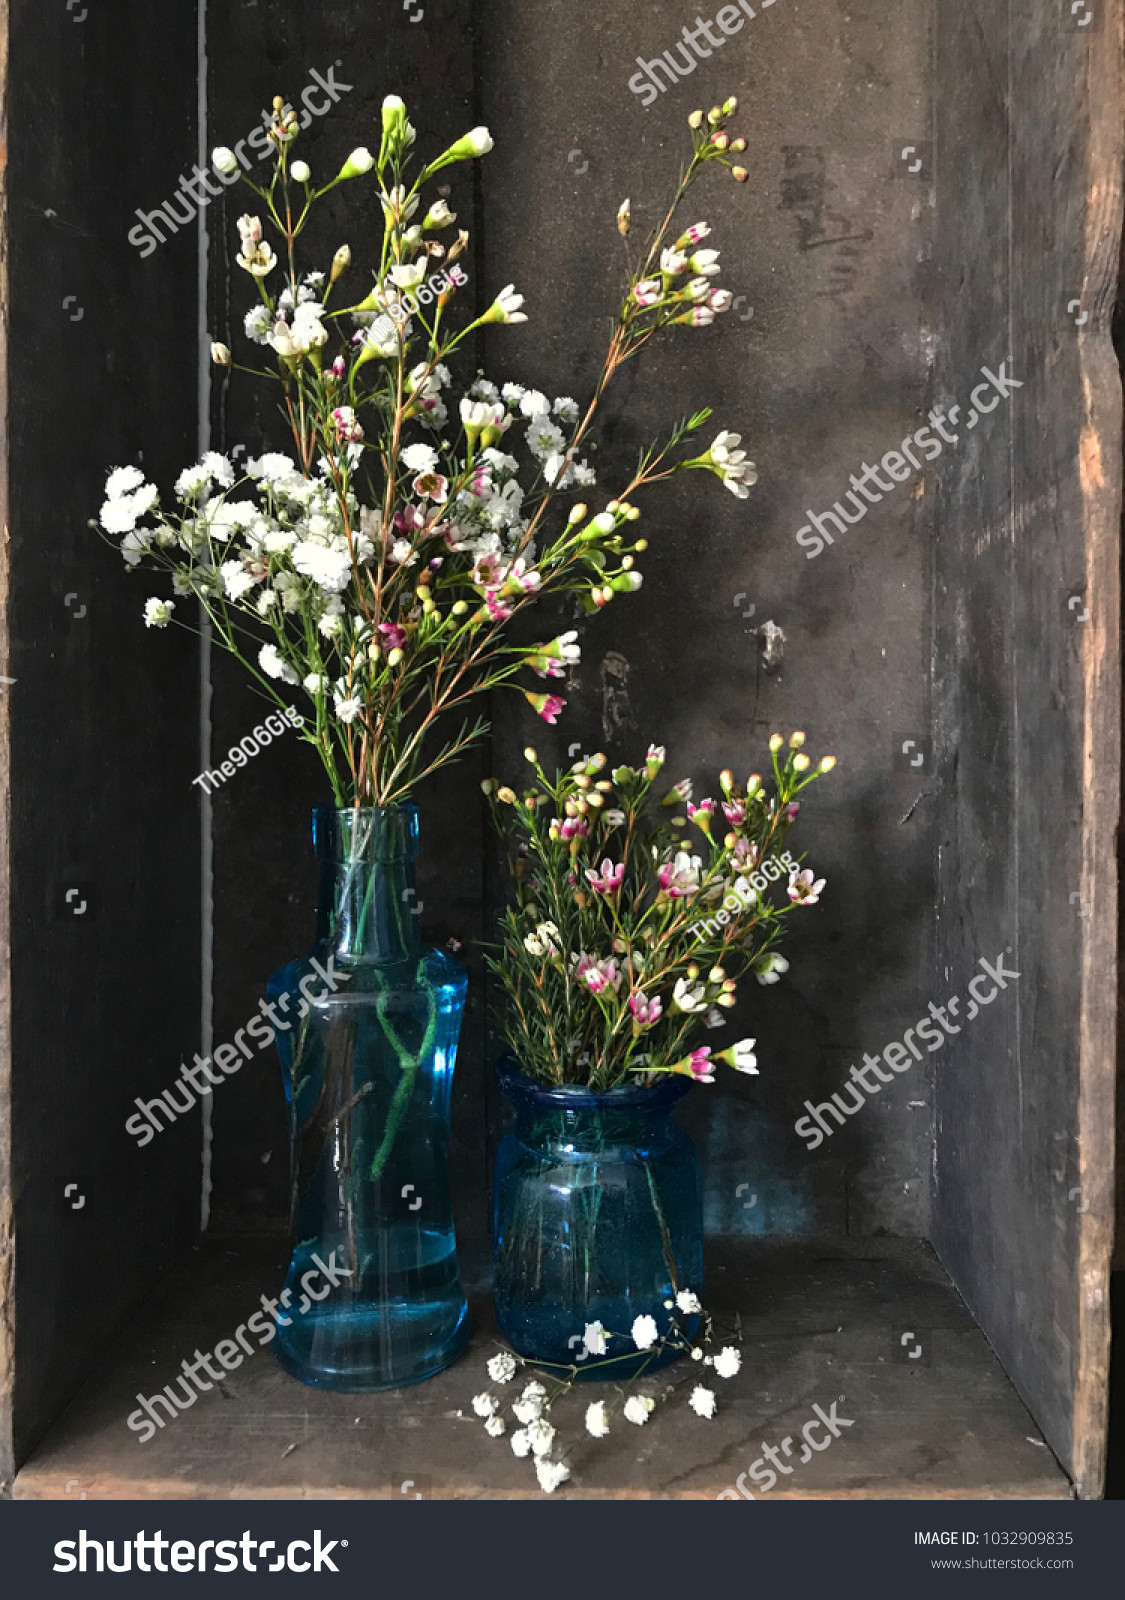 18 Spectacular Old Blue Glass Vases 2024 free download old blue glass vases of wildflowers babys breath blue glass vases stock photo edit now regarding wildflowers and babys breath in blue glass vases wood background rustic country scene